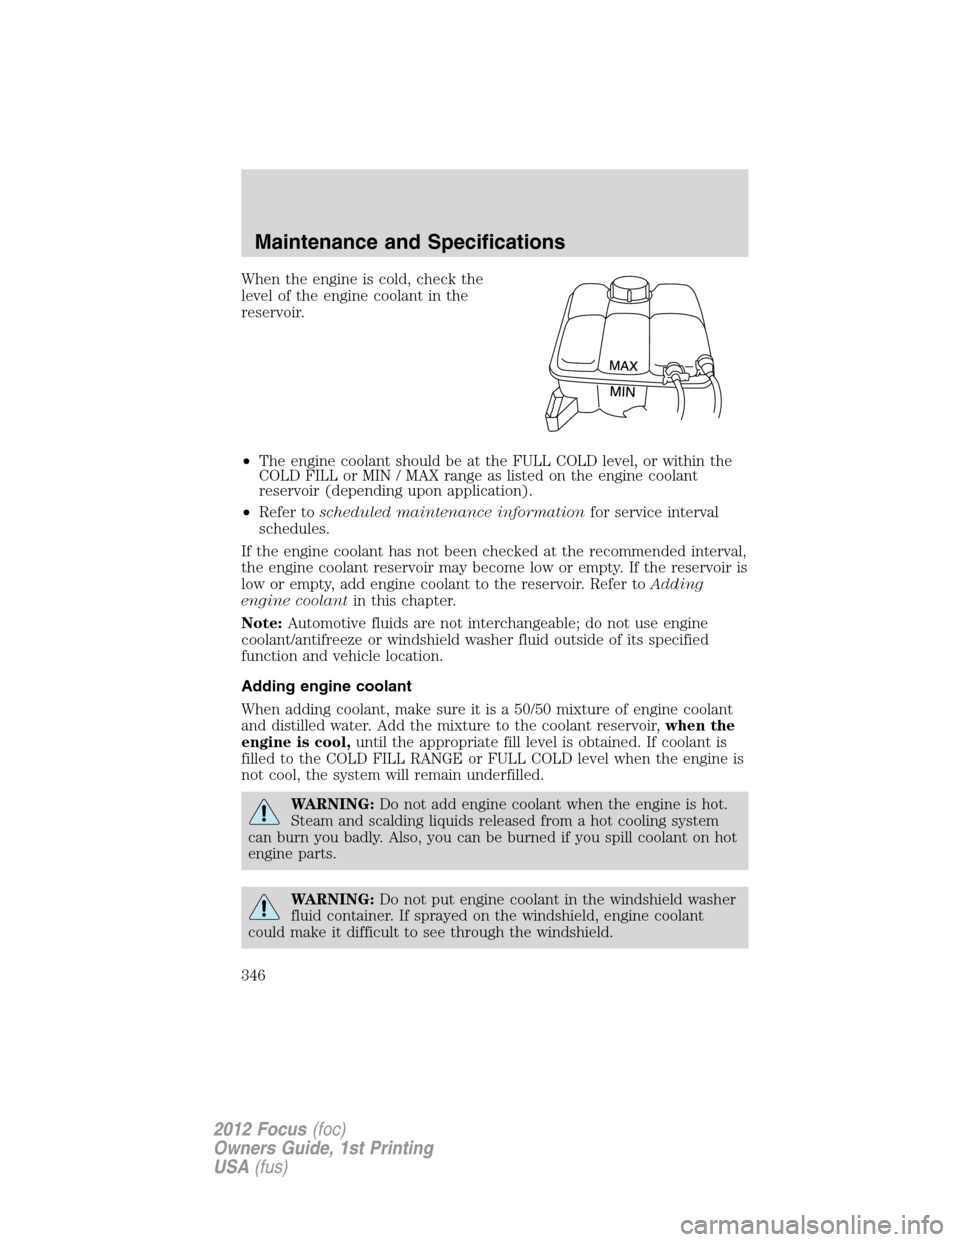 FORD FOCUS 2012 3.G Owners Manual When the engine is cold, check the
level of the engine coolant in the
reservoir.
•The engine coolant should be at the FULL COLD level, or within the
COLD FILL or MIN / MAX range as listed on the eng